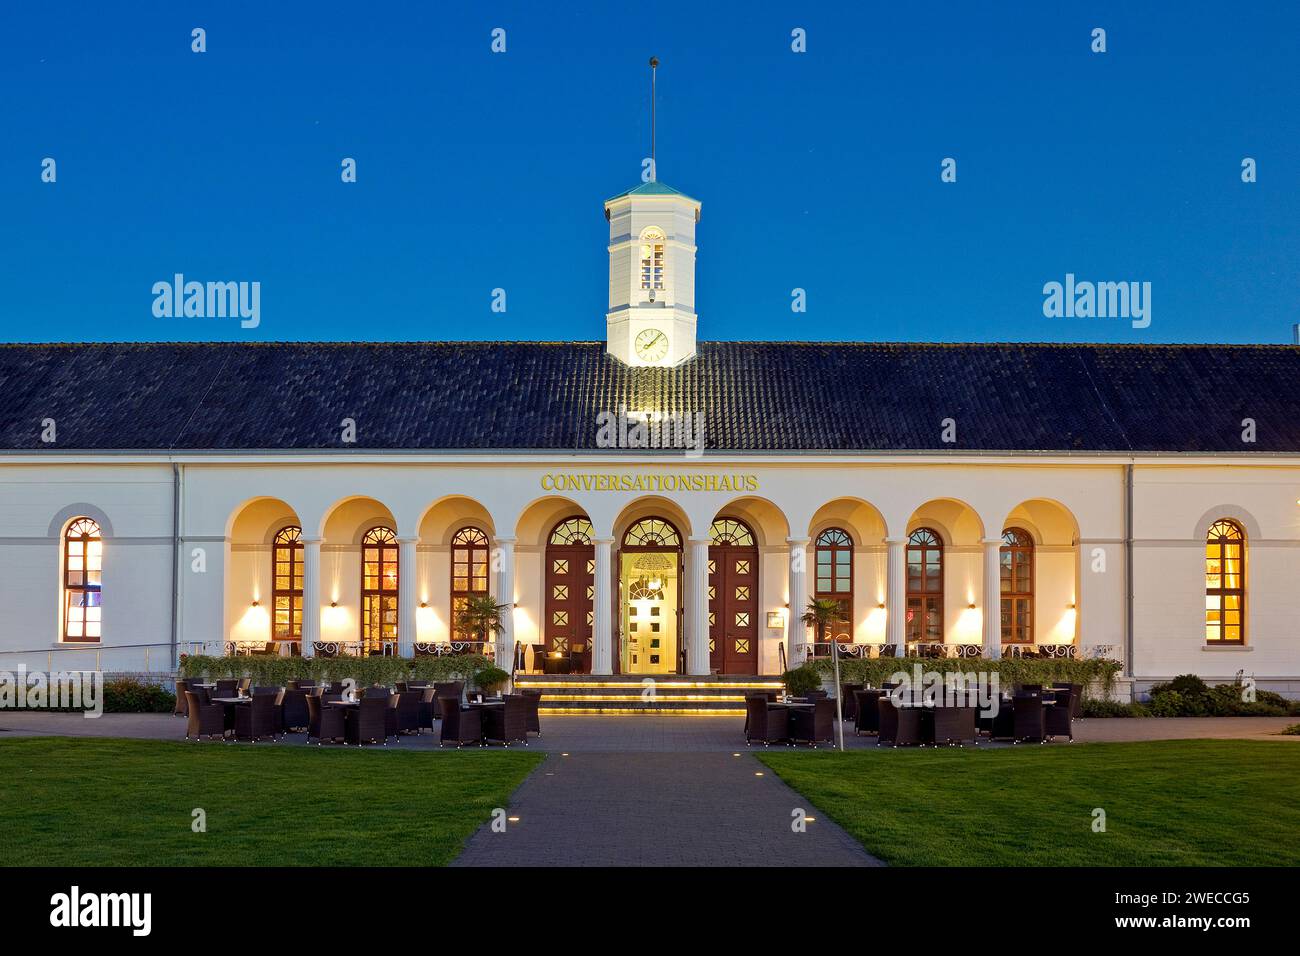 Illuminated Conversationshaus with spa gardens in the evening, Germany, Lower Saxony, Norderney Stock Photo